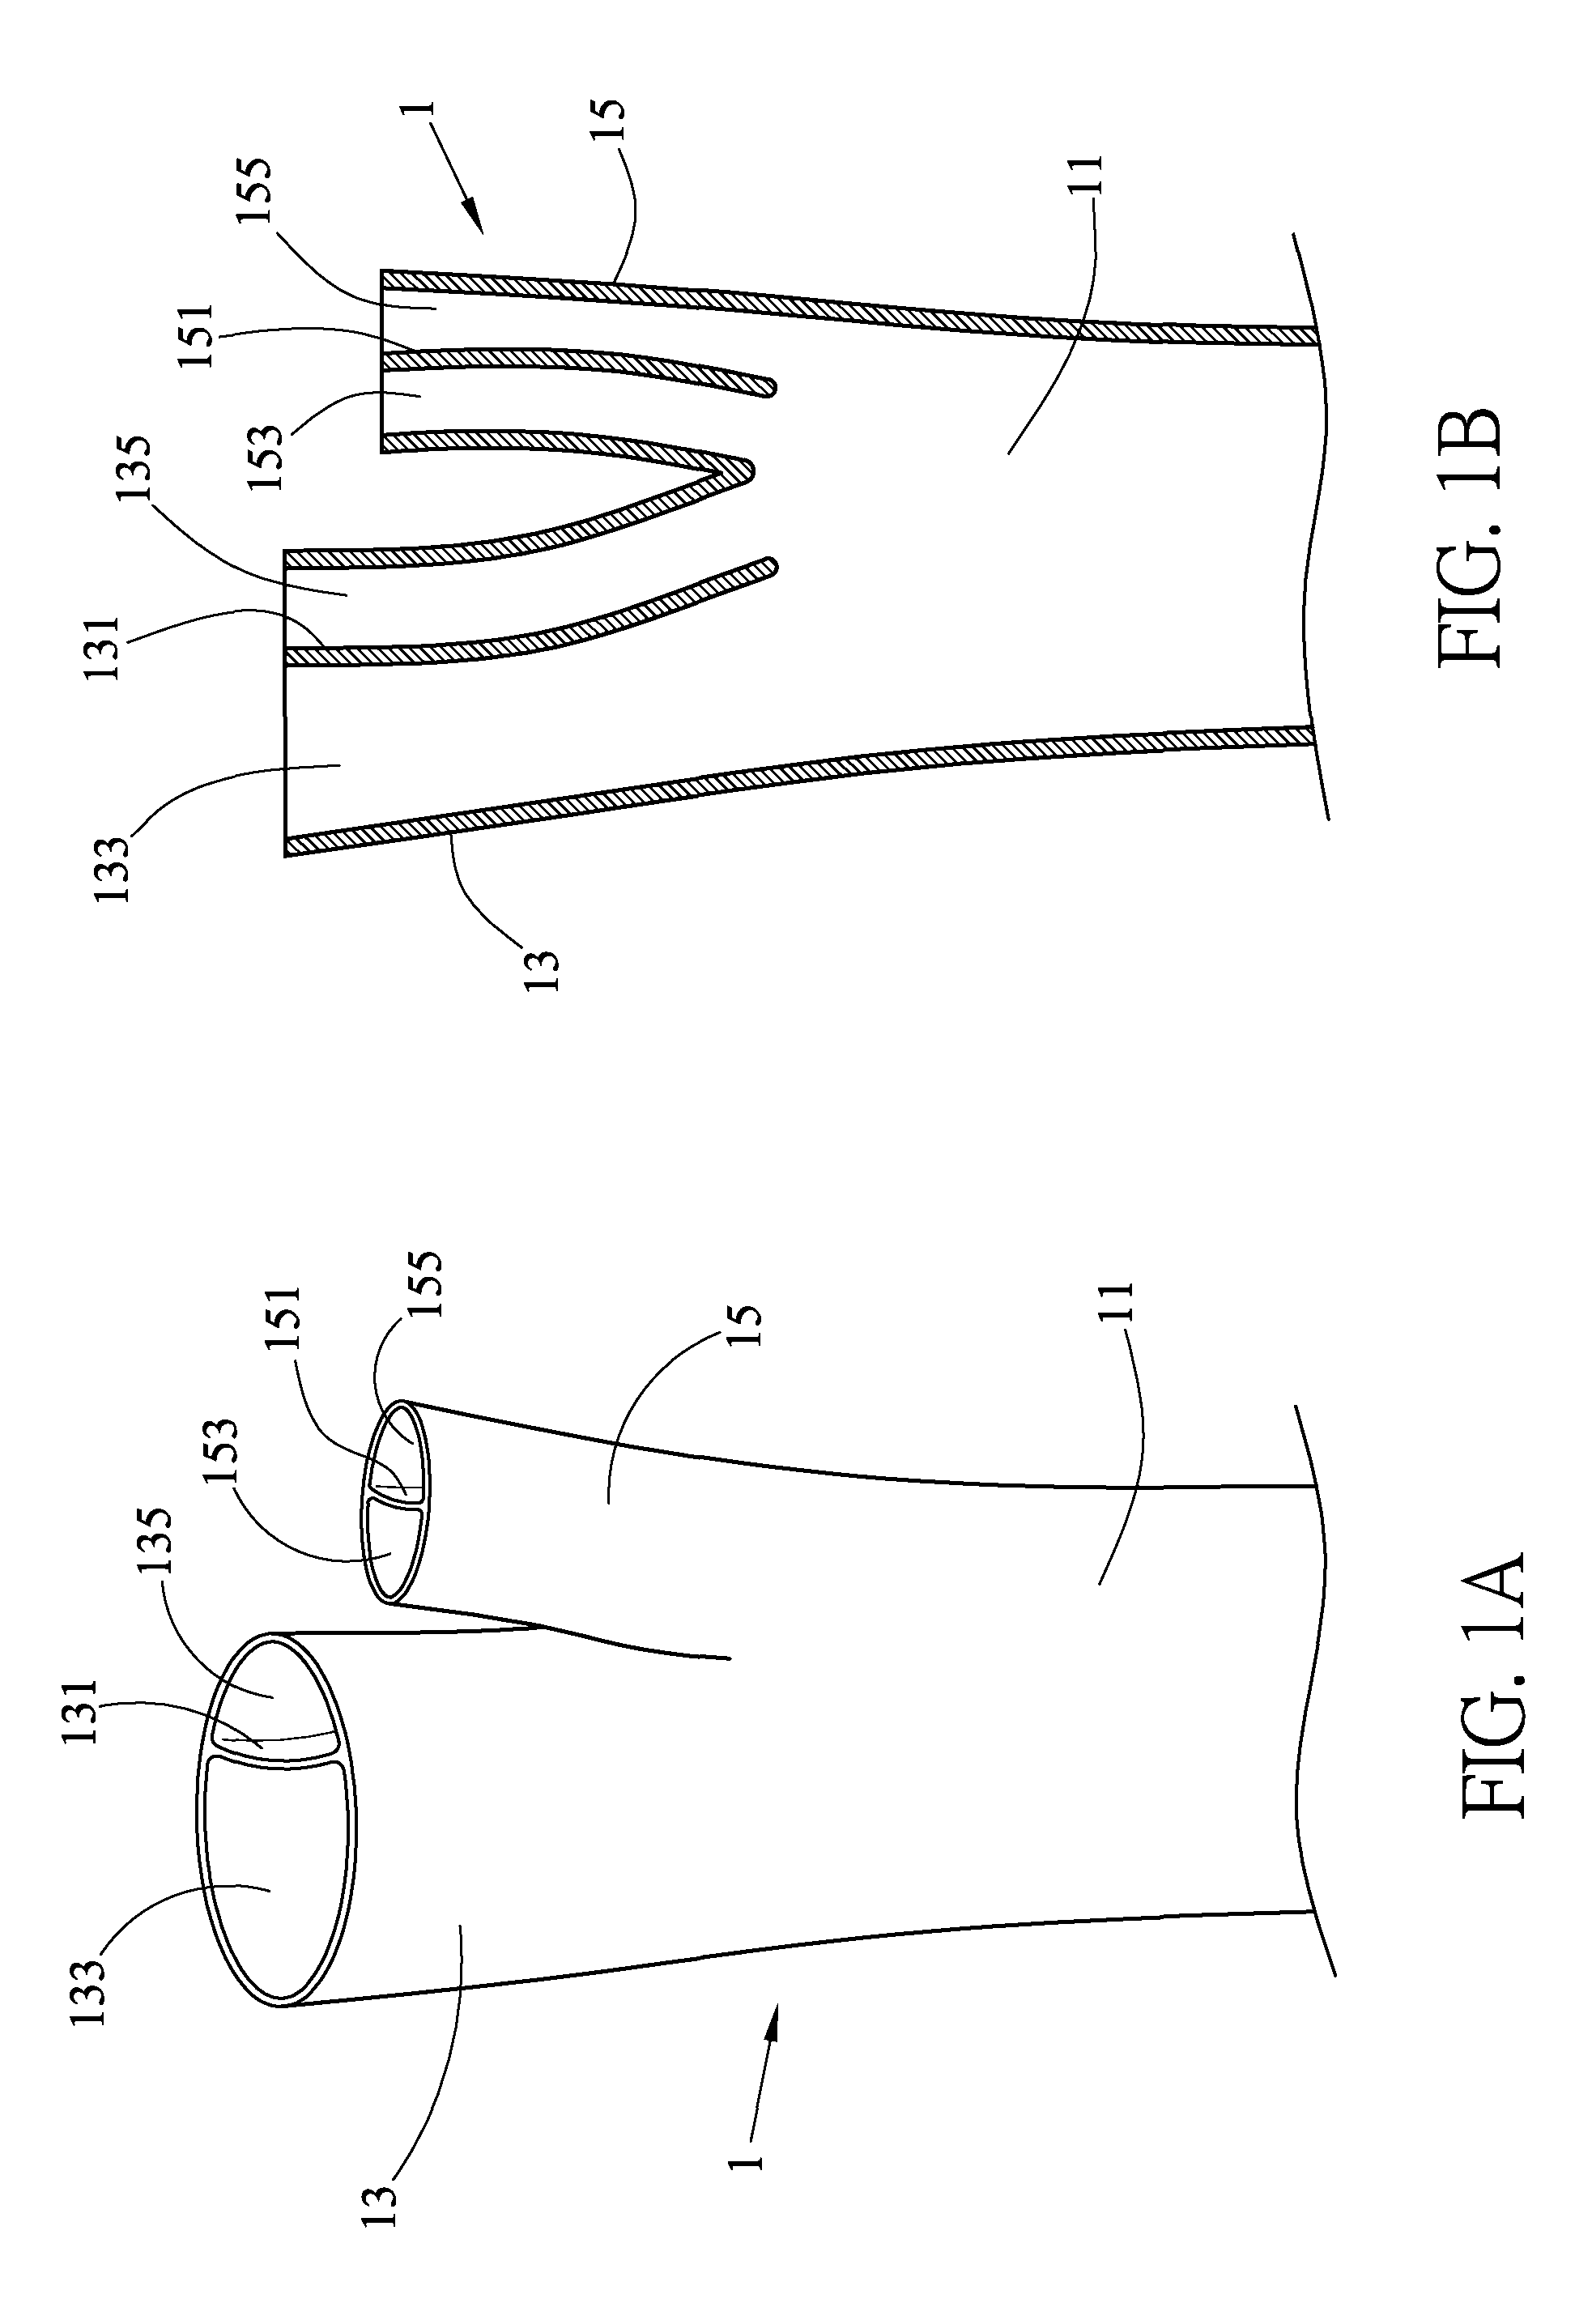 Method of implanting an aortic stent